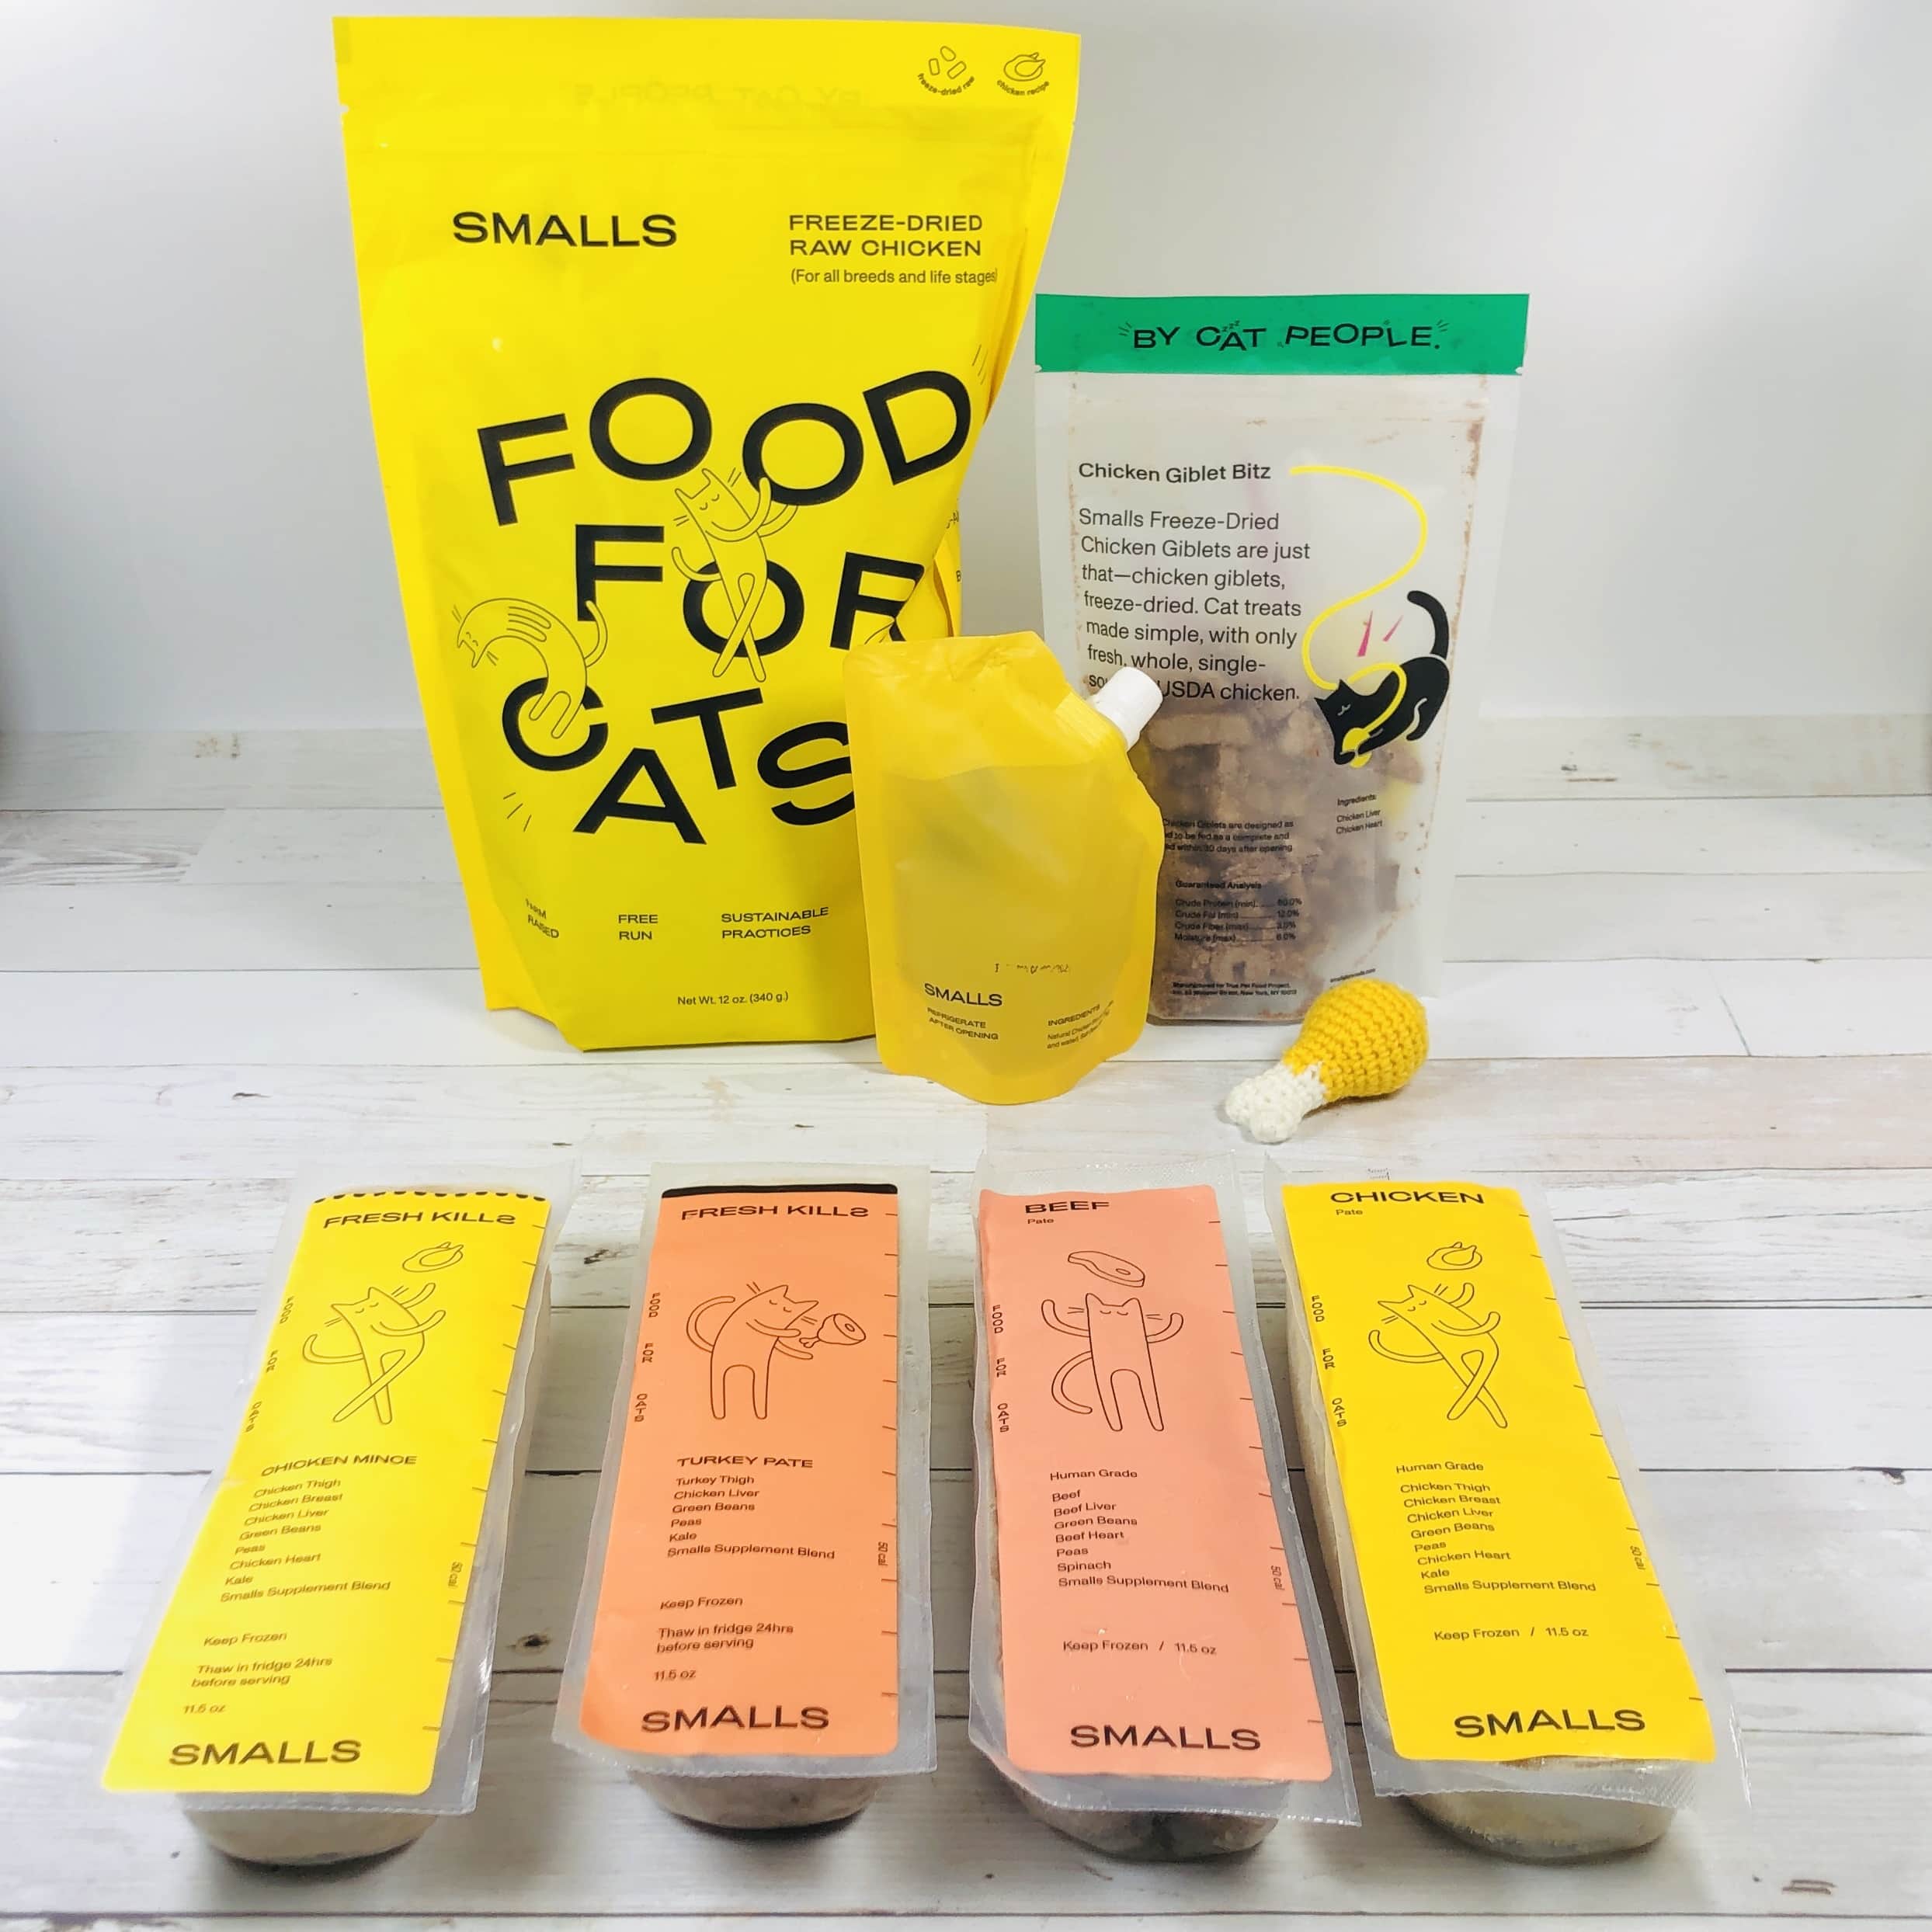 Smalls Digz Cat Litter Subscription Box Review + Coupon! - Hello  Subscription